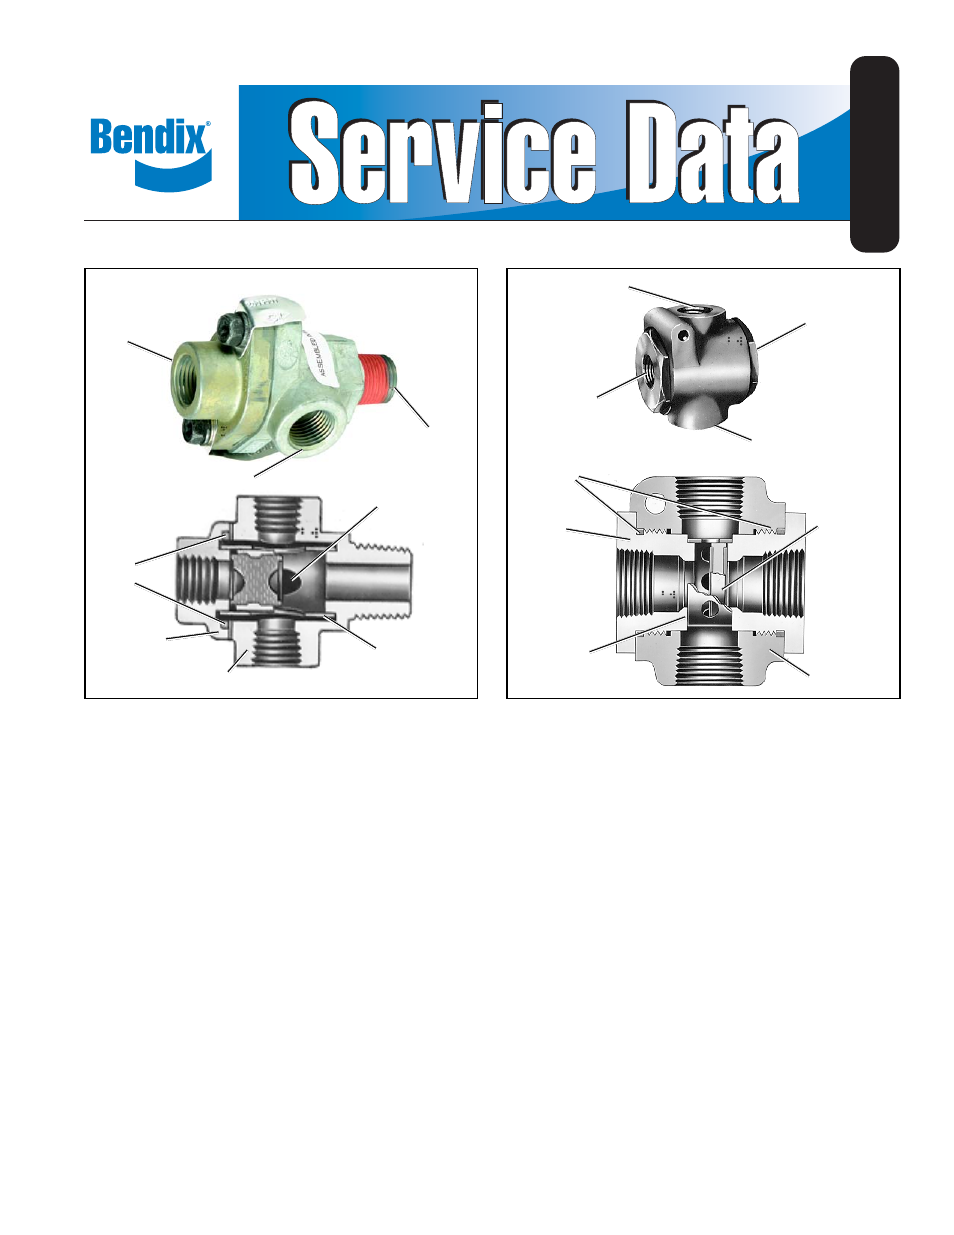 Bendix Commercial Vehicle Systems DC-4 DOUBLE CHECK VALVES User Manual